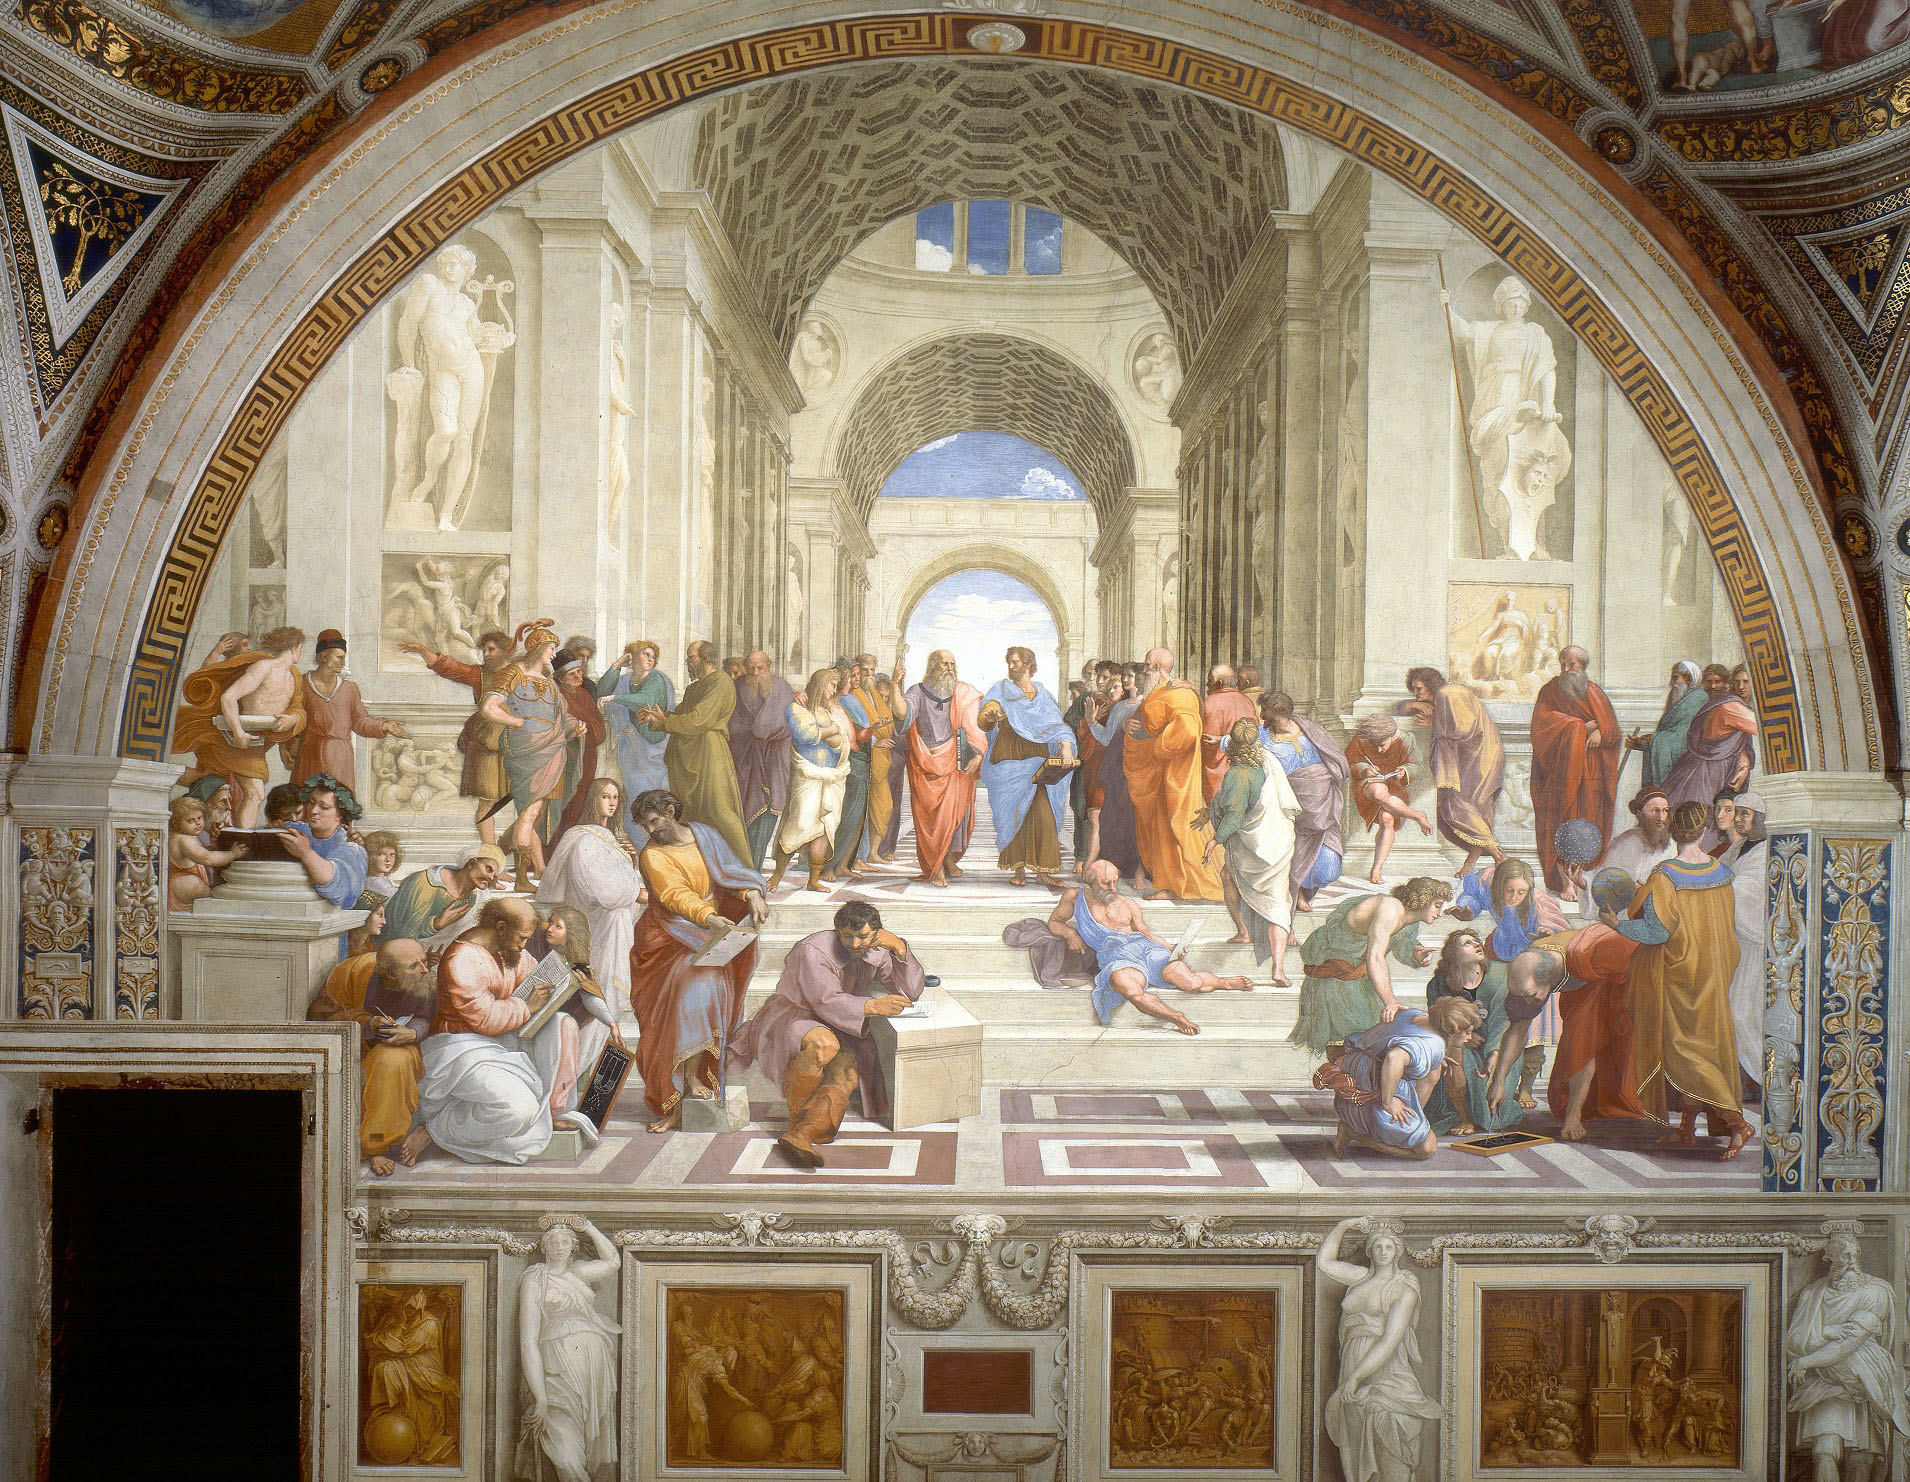 Raphael's works in Rome: five places to see in two days